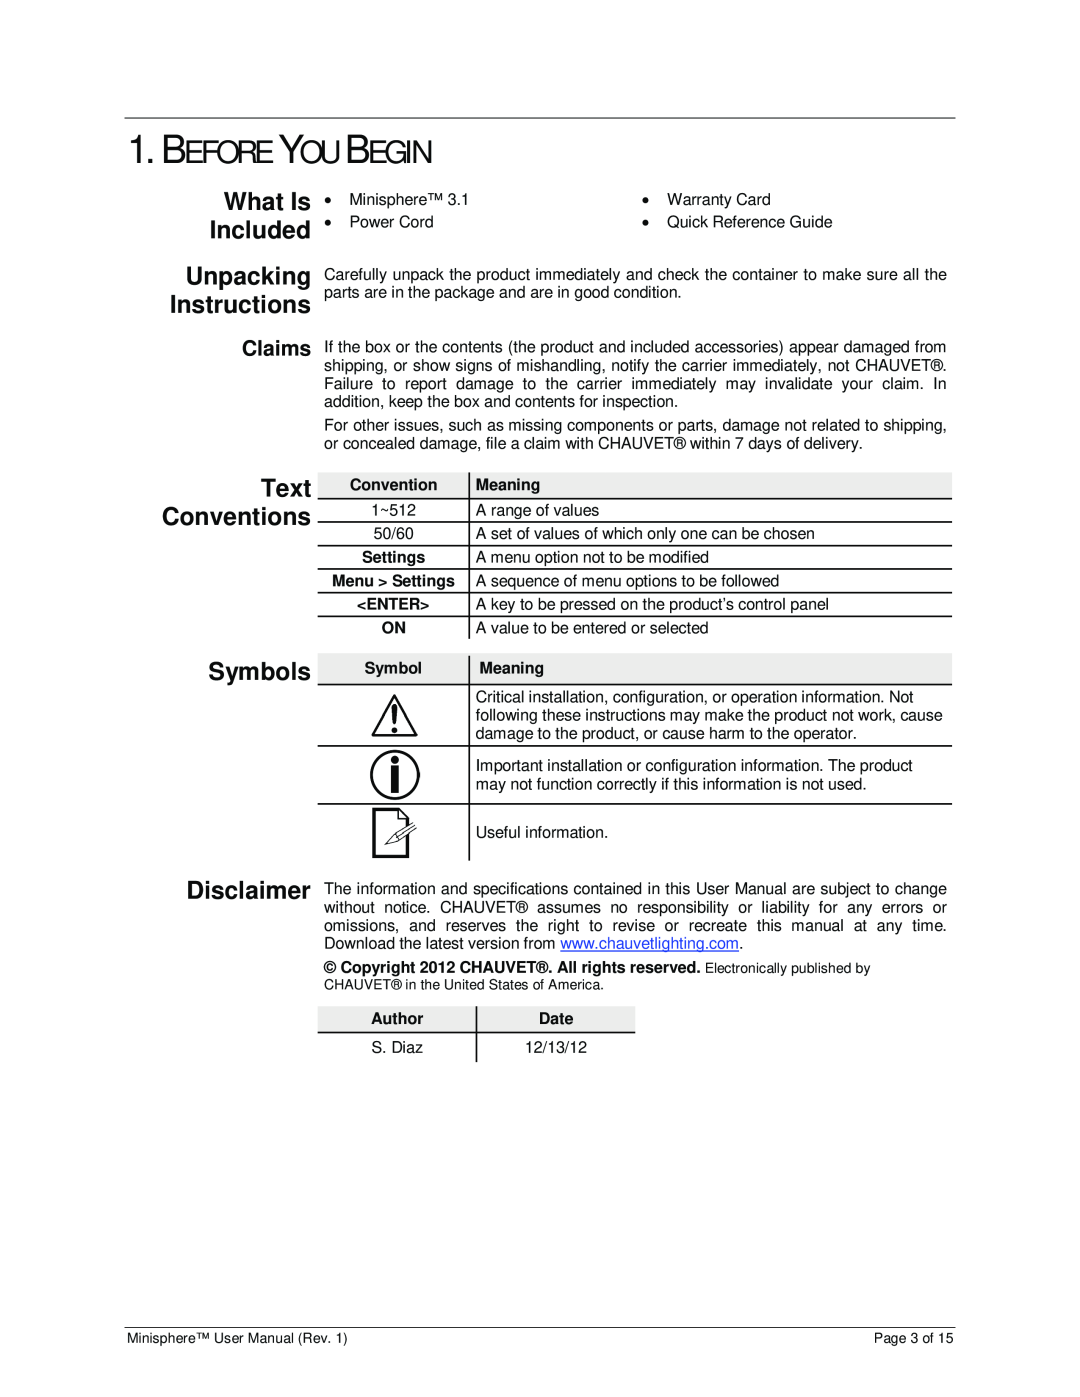 Chauvet 3.1 user manual Before You Begin, What Is Included, Unpacking Instructions, Text, Symbols, Conventions, Claims 